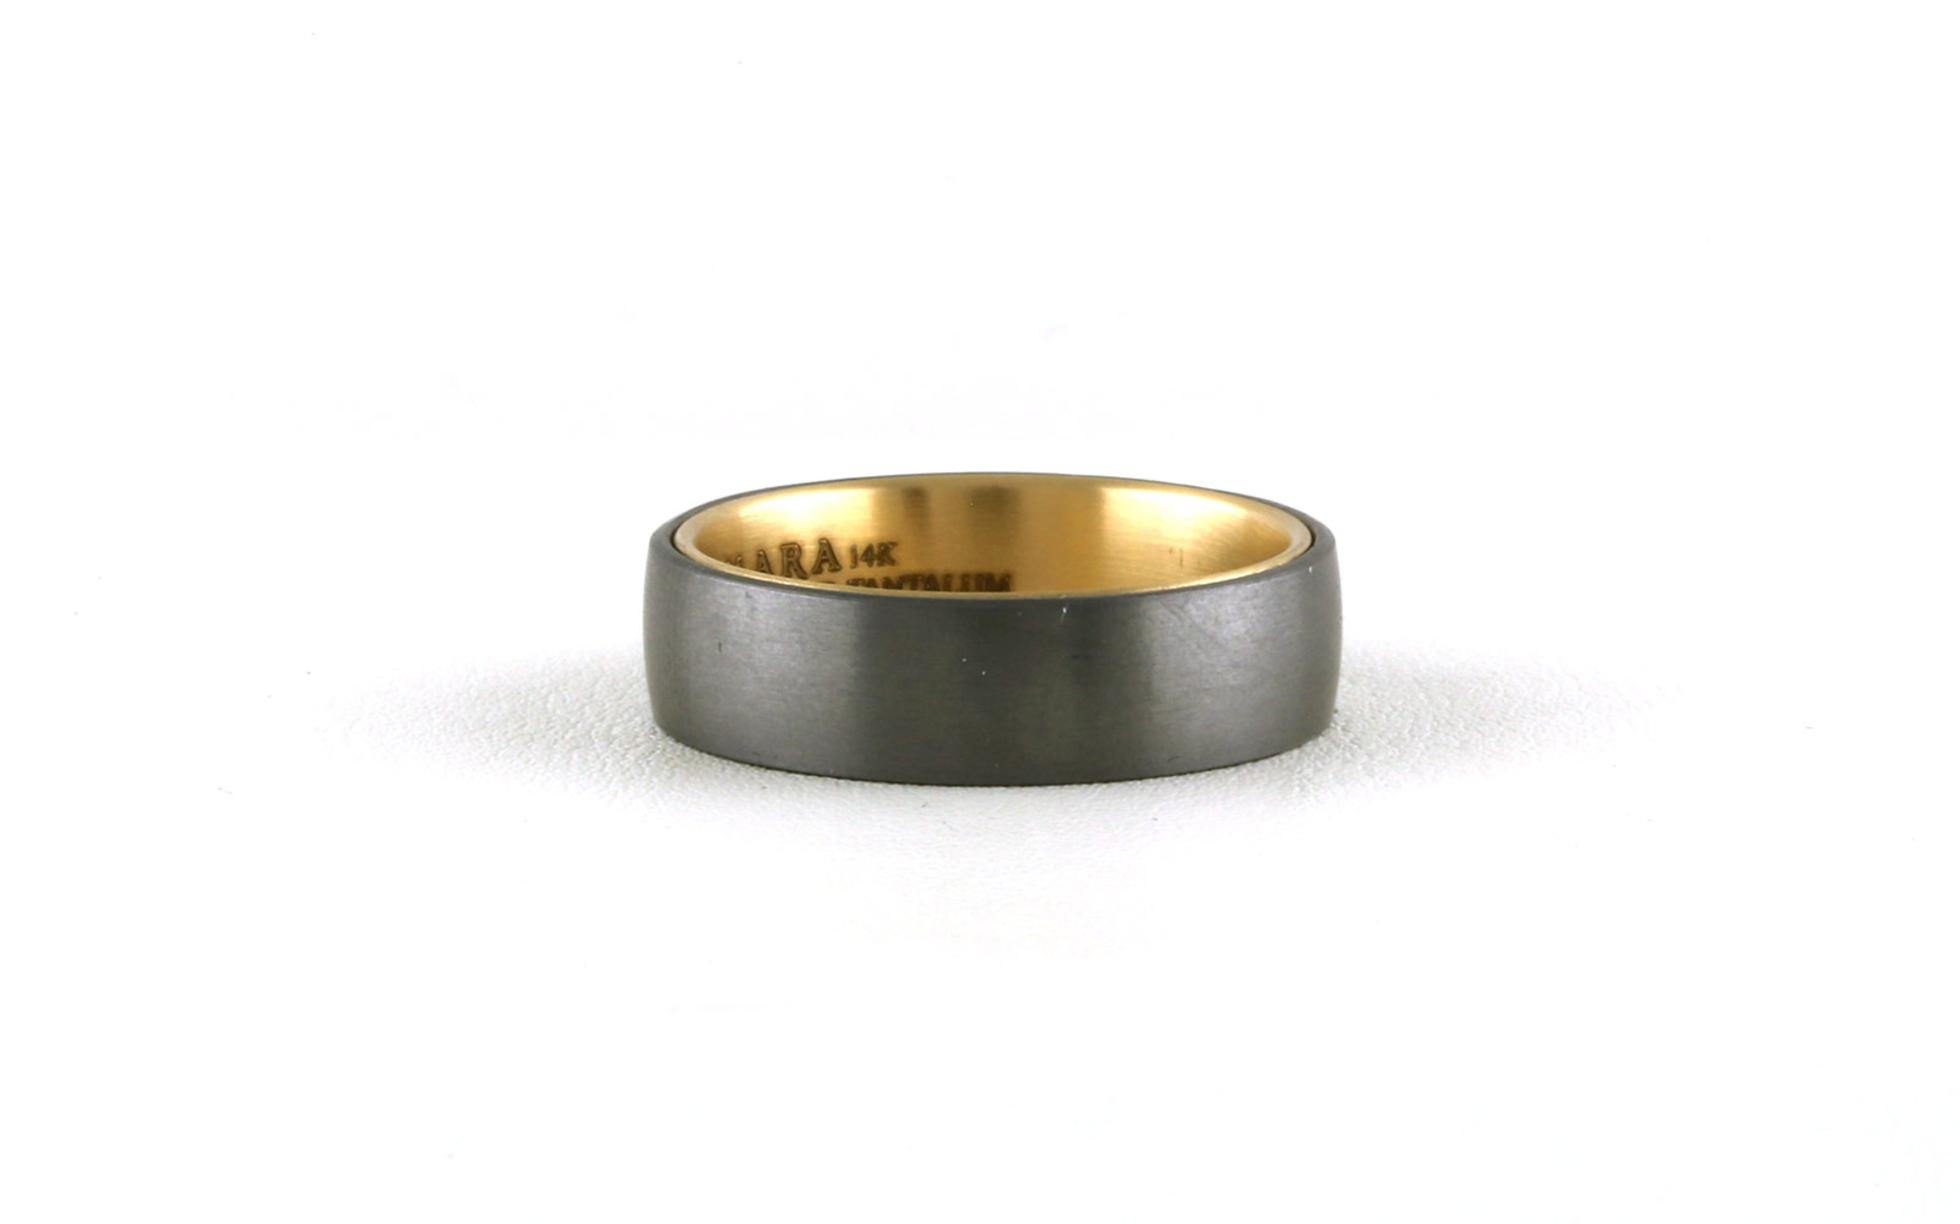 Flat Comfort Fit Wedding Band with Satin Texture in Yellow Gold Inside and Gray Tantalum Outside (sz 10)